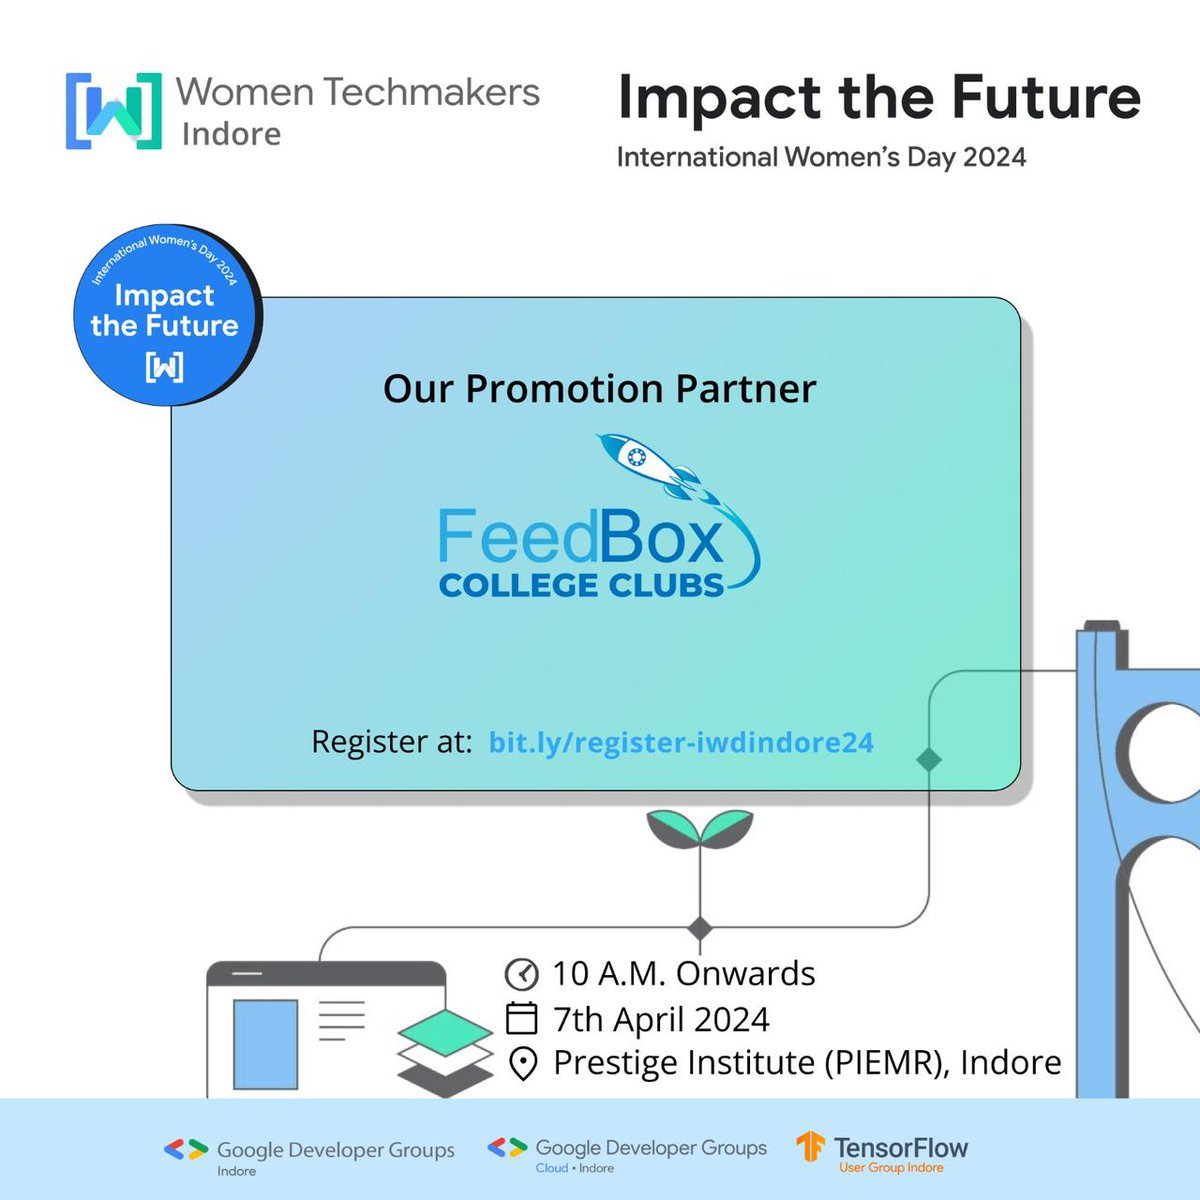 🎉 Exciting News Alert! 🎉

We're thrilled to unveil the amazing additions to our #IWDIndore2024 promotions partnerships:

🌟 Introducing our Tech Partner: ProtonsHub
🚀 And our Promotion Partner: FeedBox

Join us for an unforgettable celebration of women's empowerment!